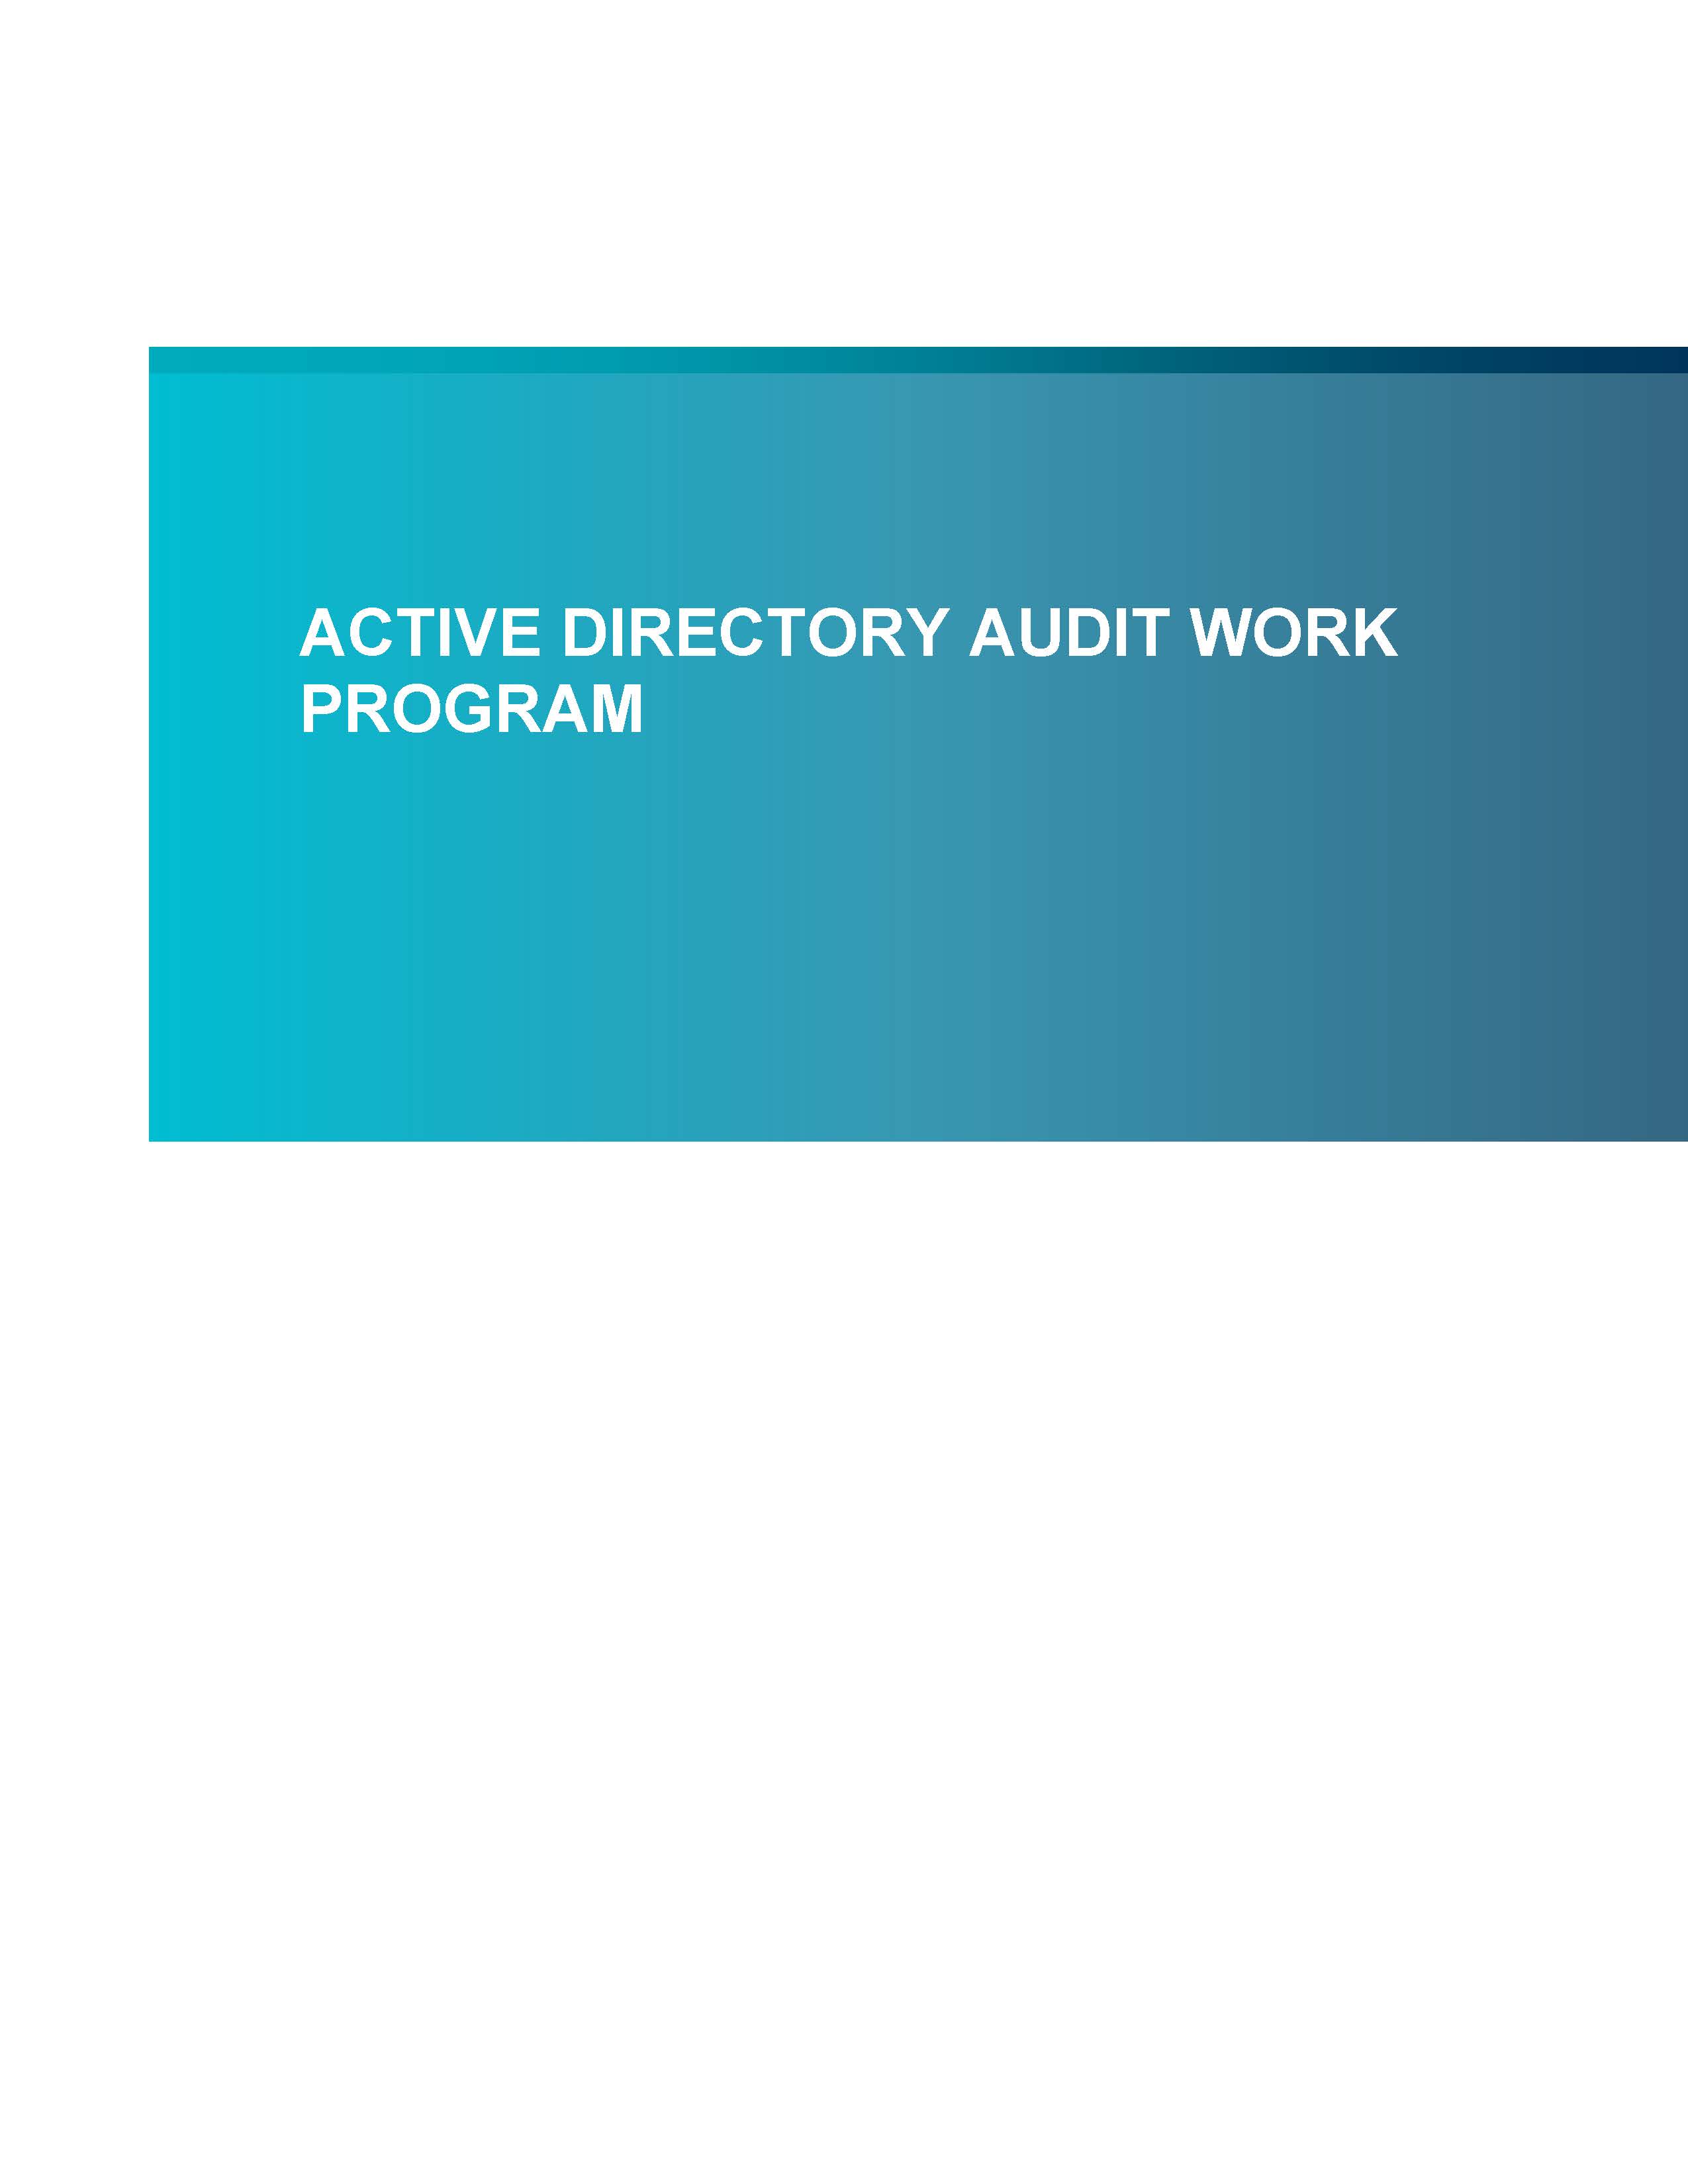 Thumbnail image of first page of Active Directory Audit Work Program